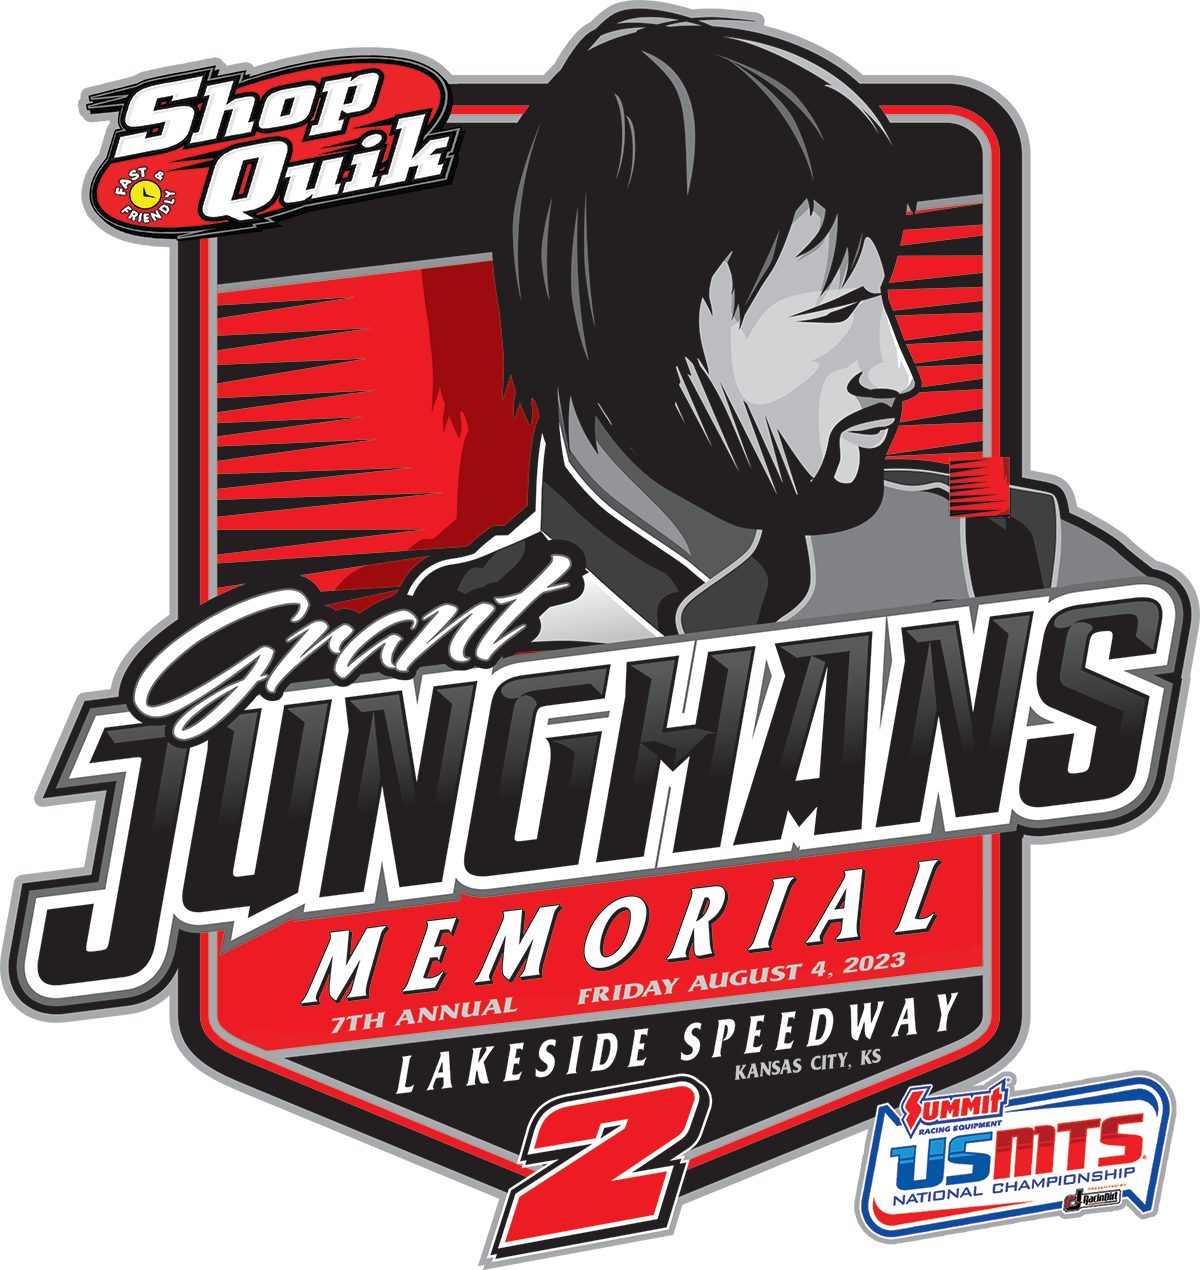 7th Annual USMTS Grant Junghans Memorial presented by Shop Quik